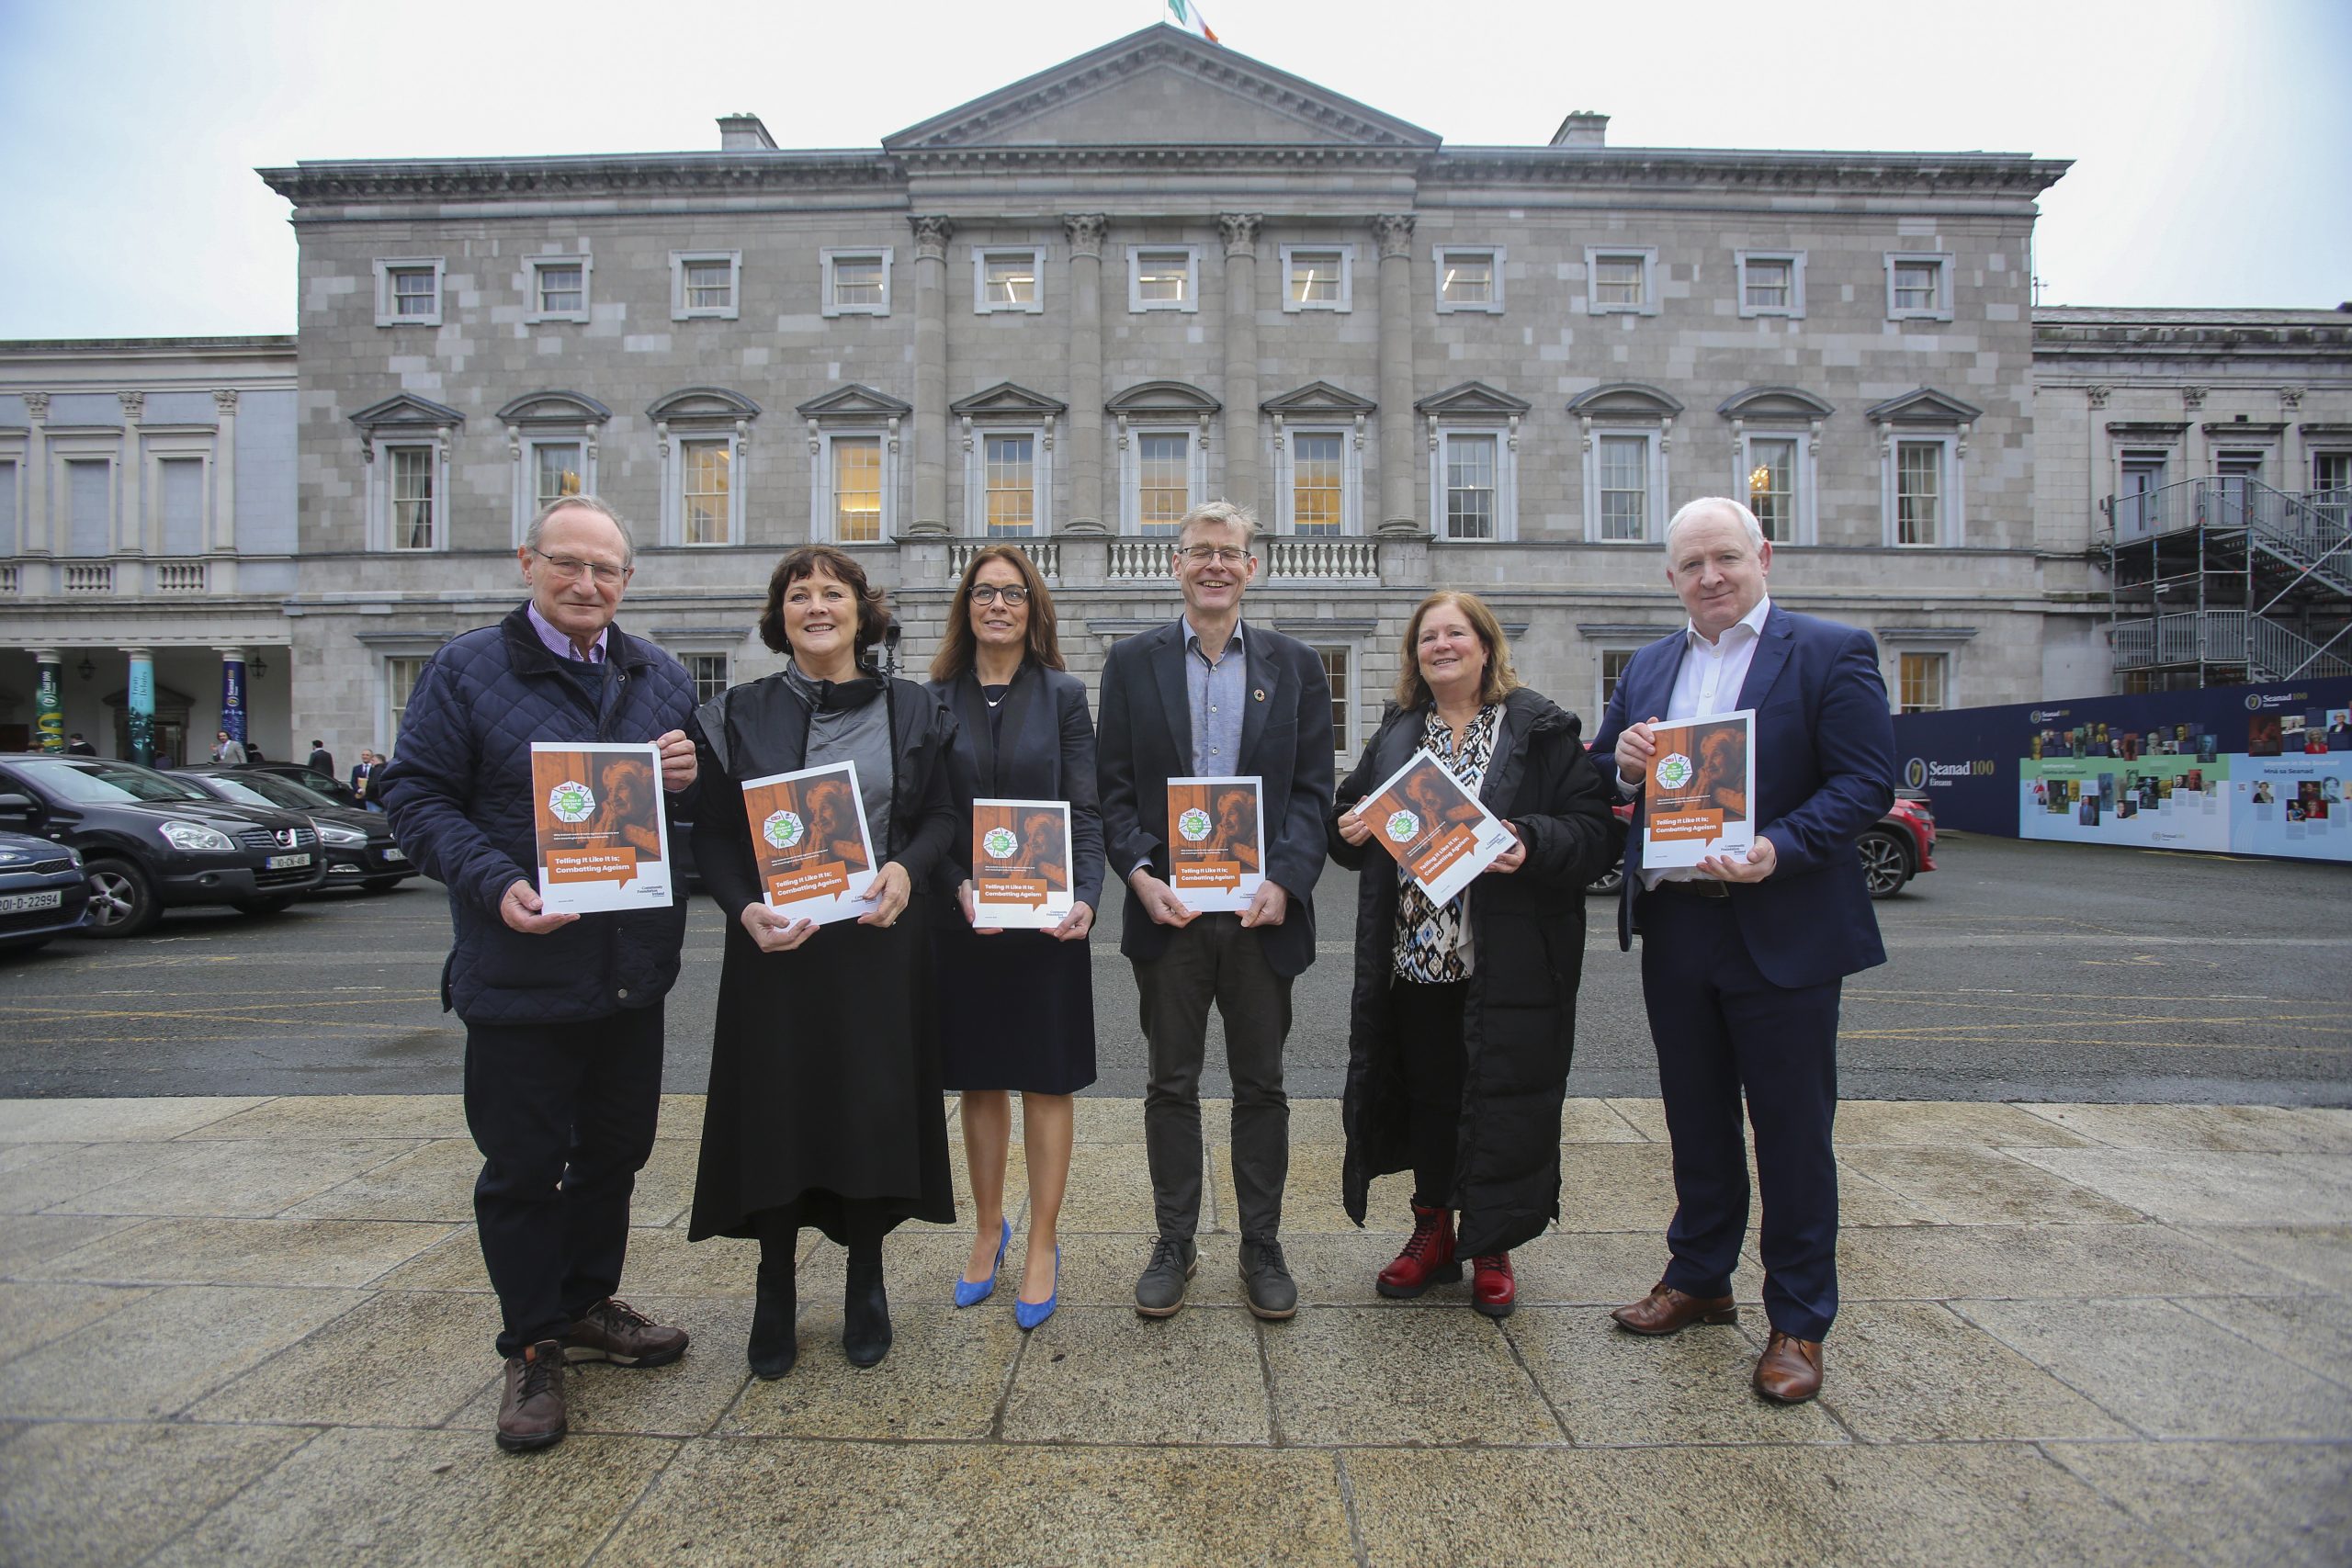 CEOs of the Alliance of Age Sector NGOs at Leinster House on January 25th